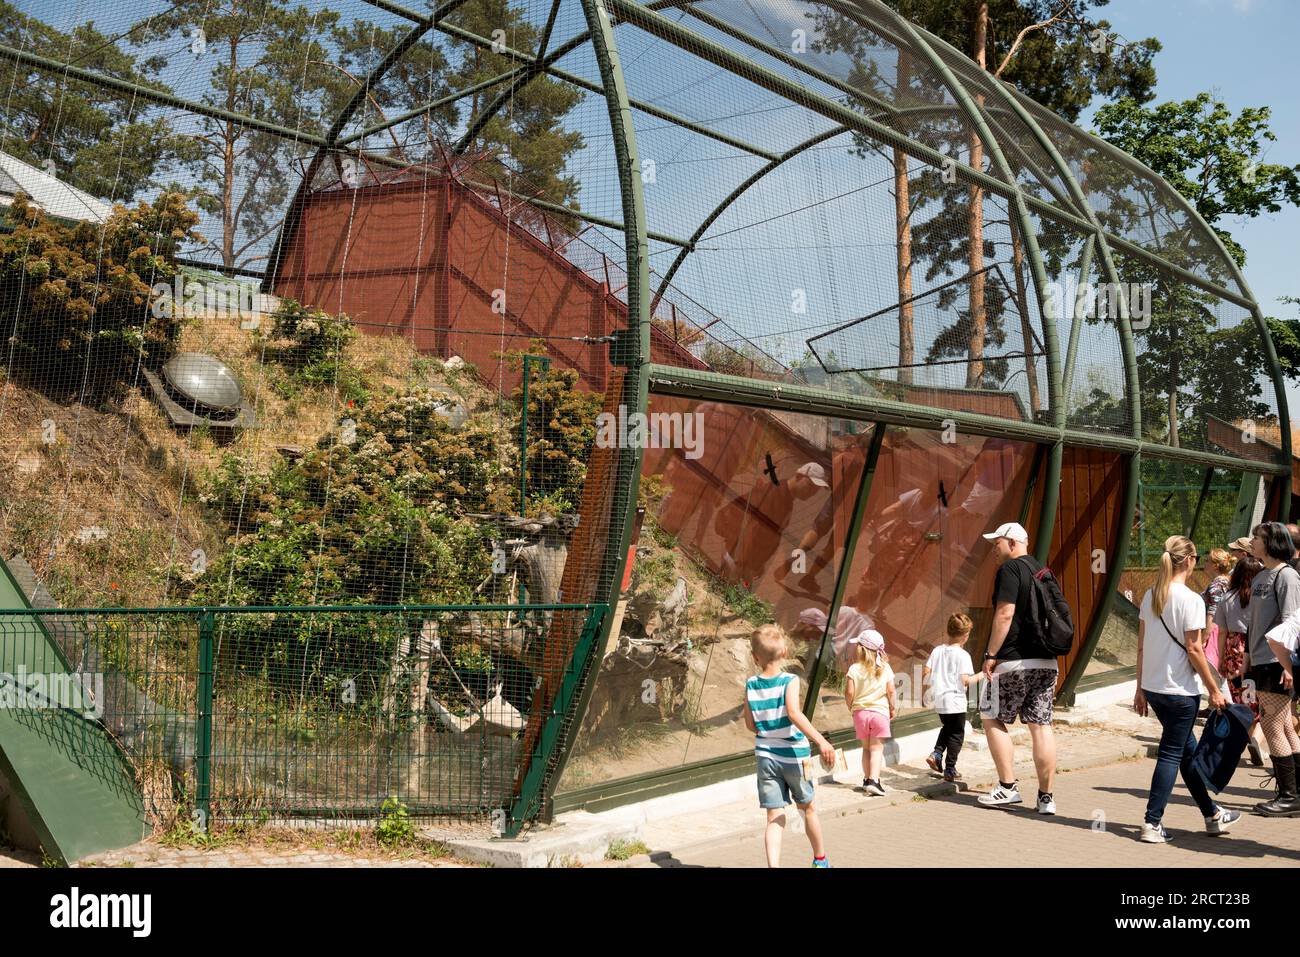 Zoo visitors at the Sand Cat enclosure large cage in the Gdansk Zoo, Oliwa, Gdansk, Poland, Europe, EU Stock Photo